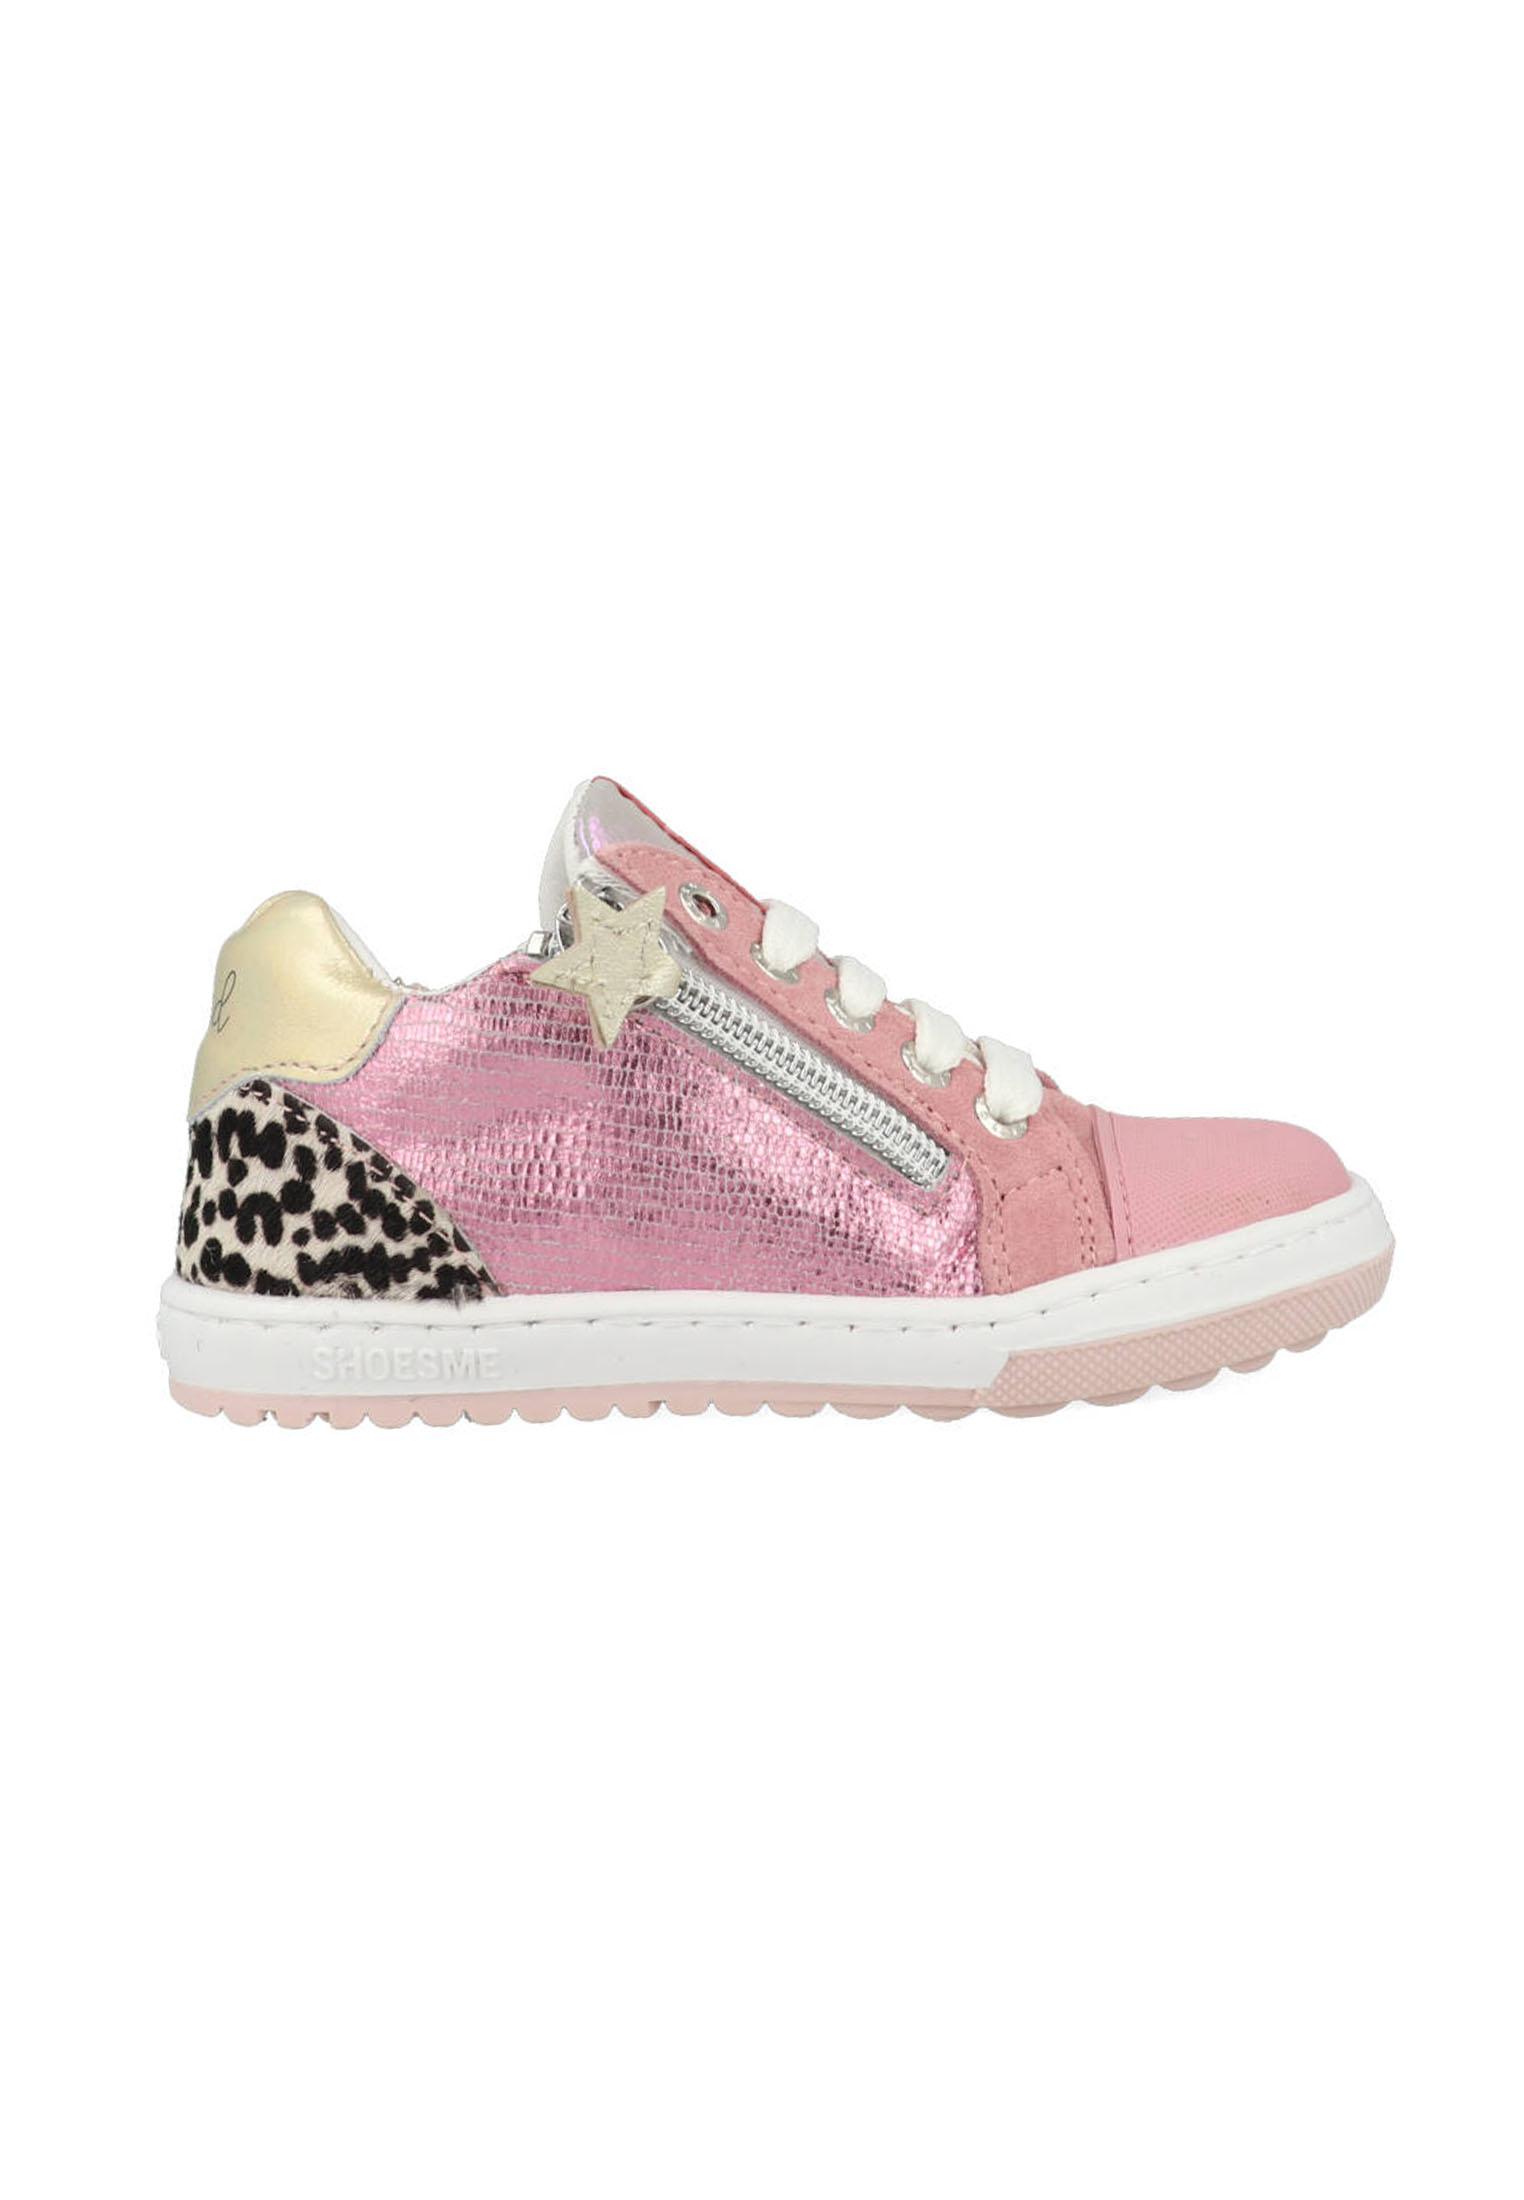 Shoesme Sneakers EF22S003-A Roze-23 maat 23